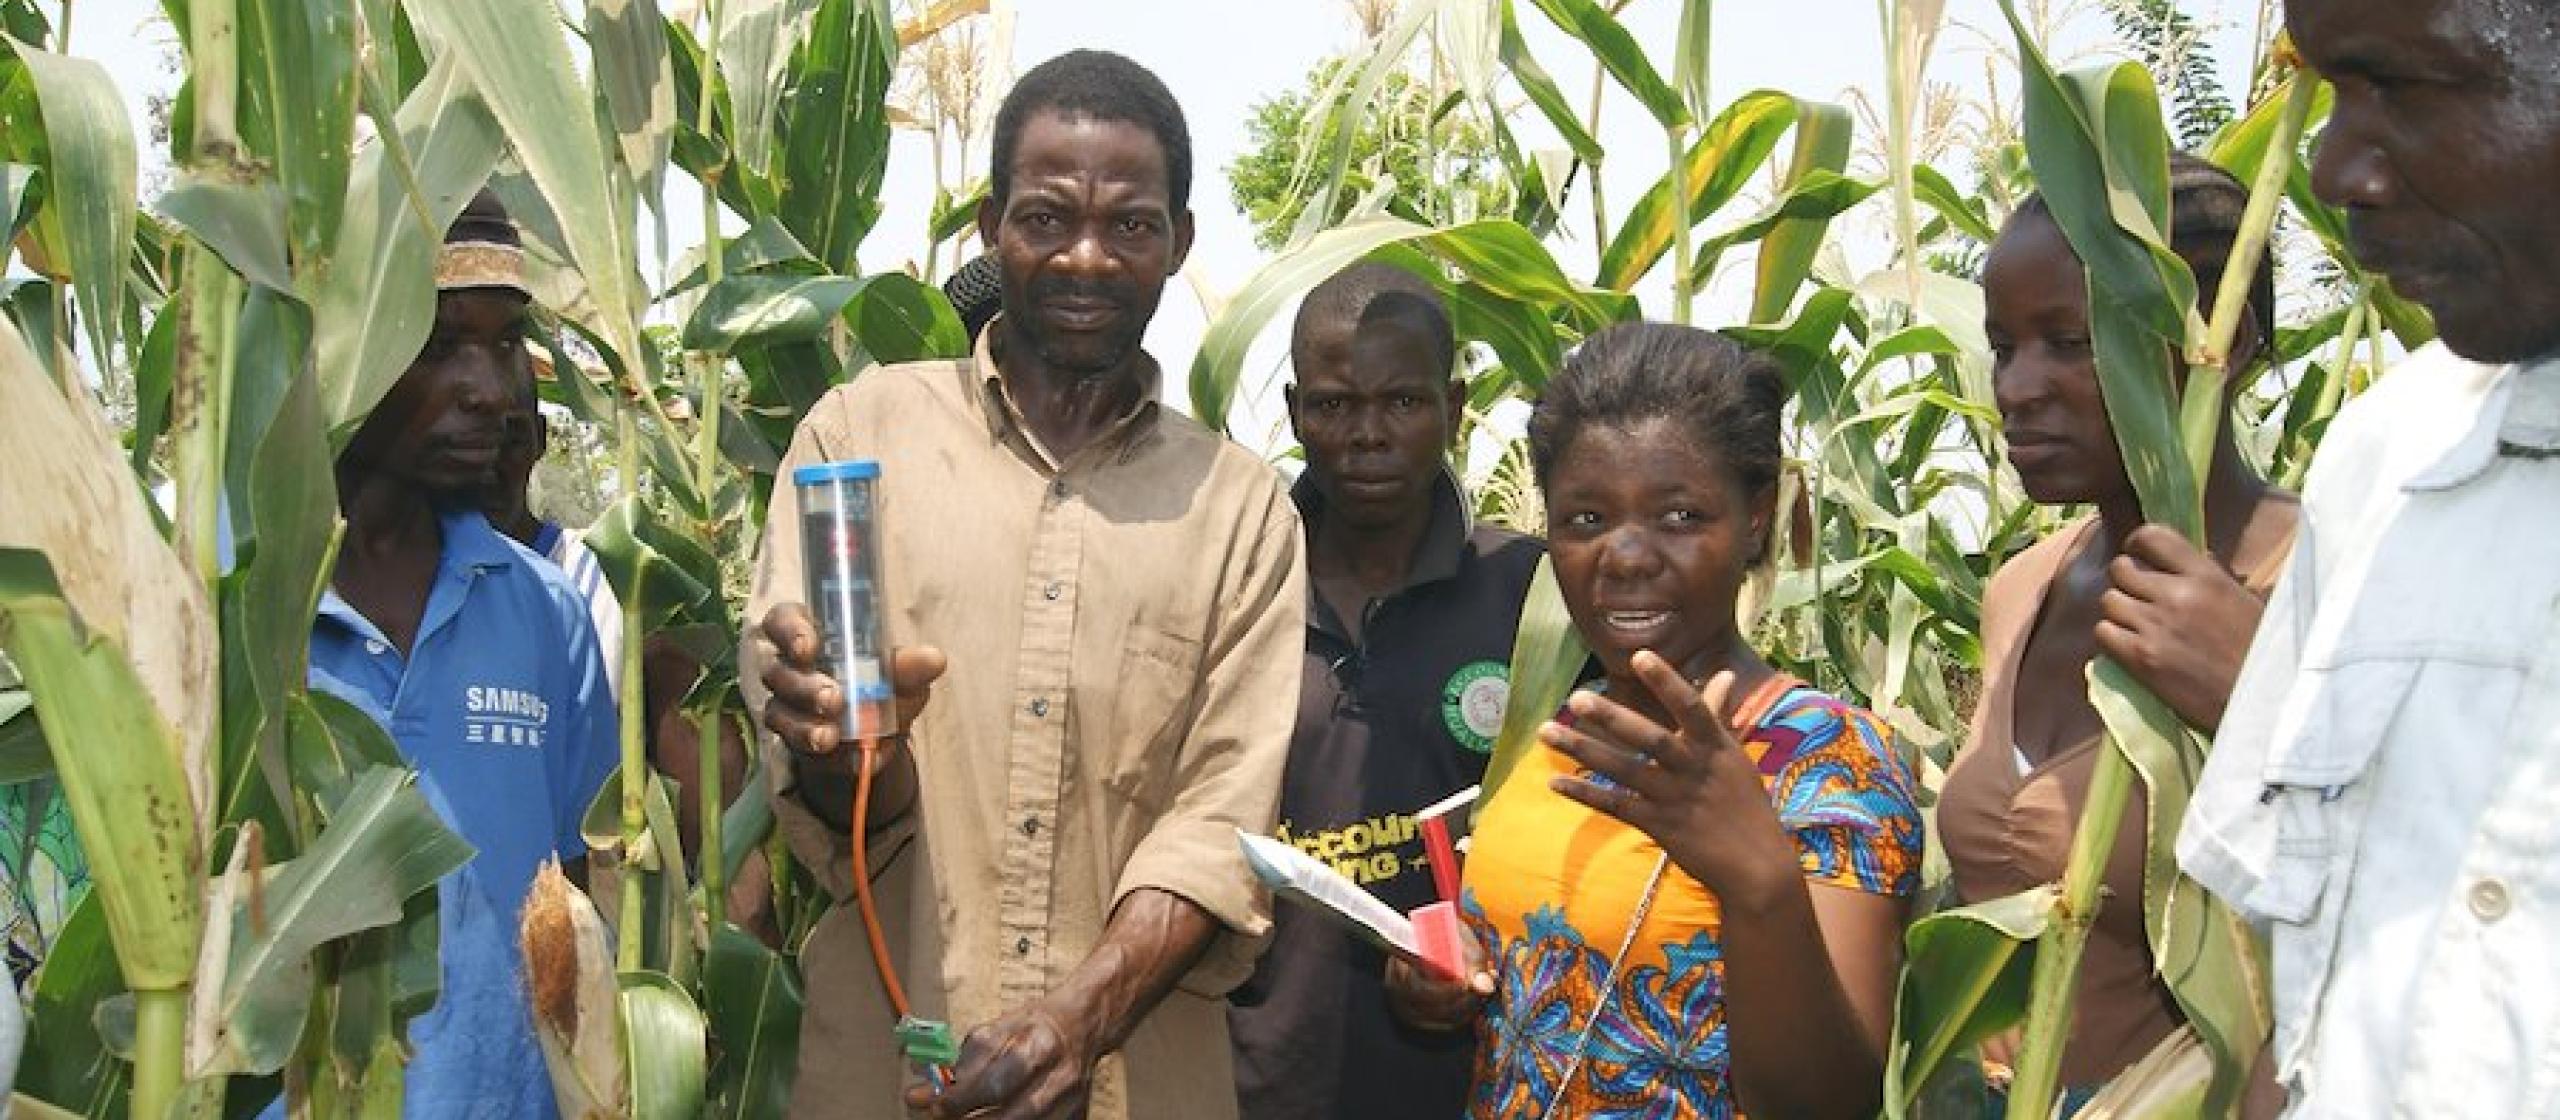 Smallholder maize farmers and VIA members in the field in Malawi with the Chameleon Soil Water Sensor. Credit: Dr Richard Stirzaker